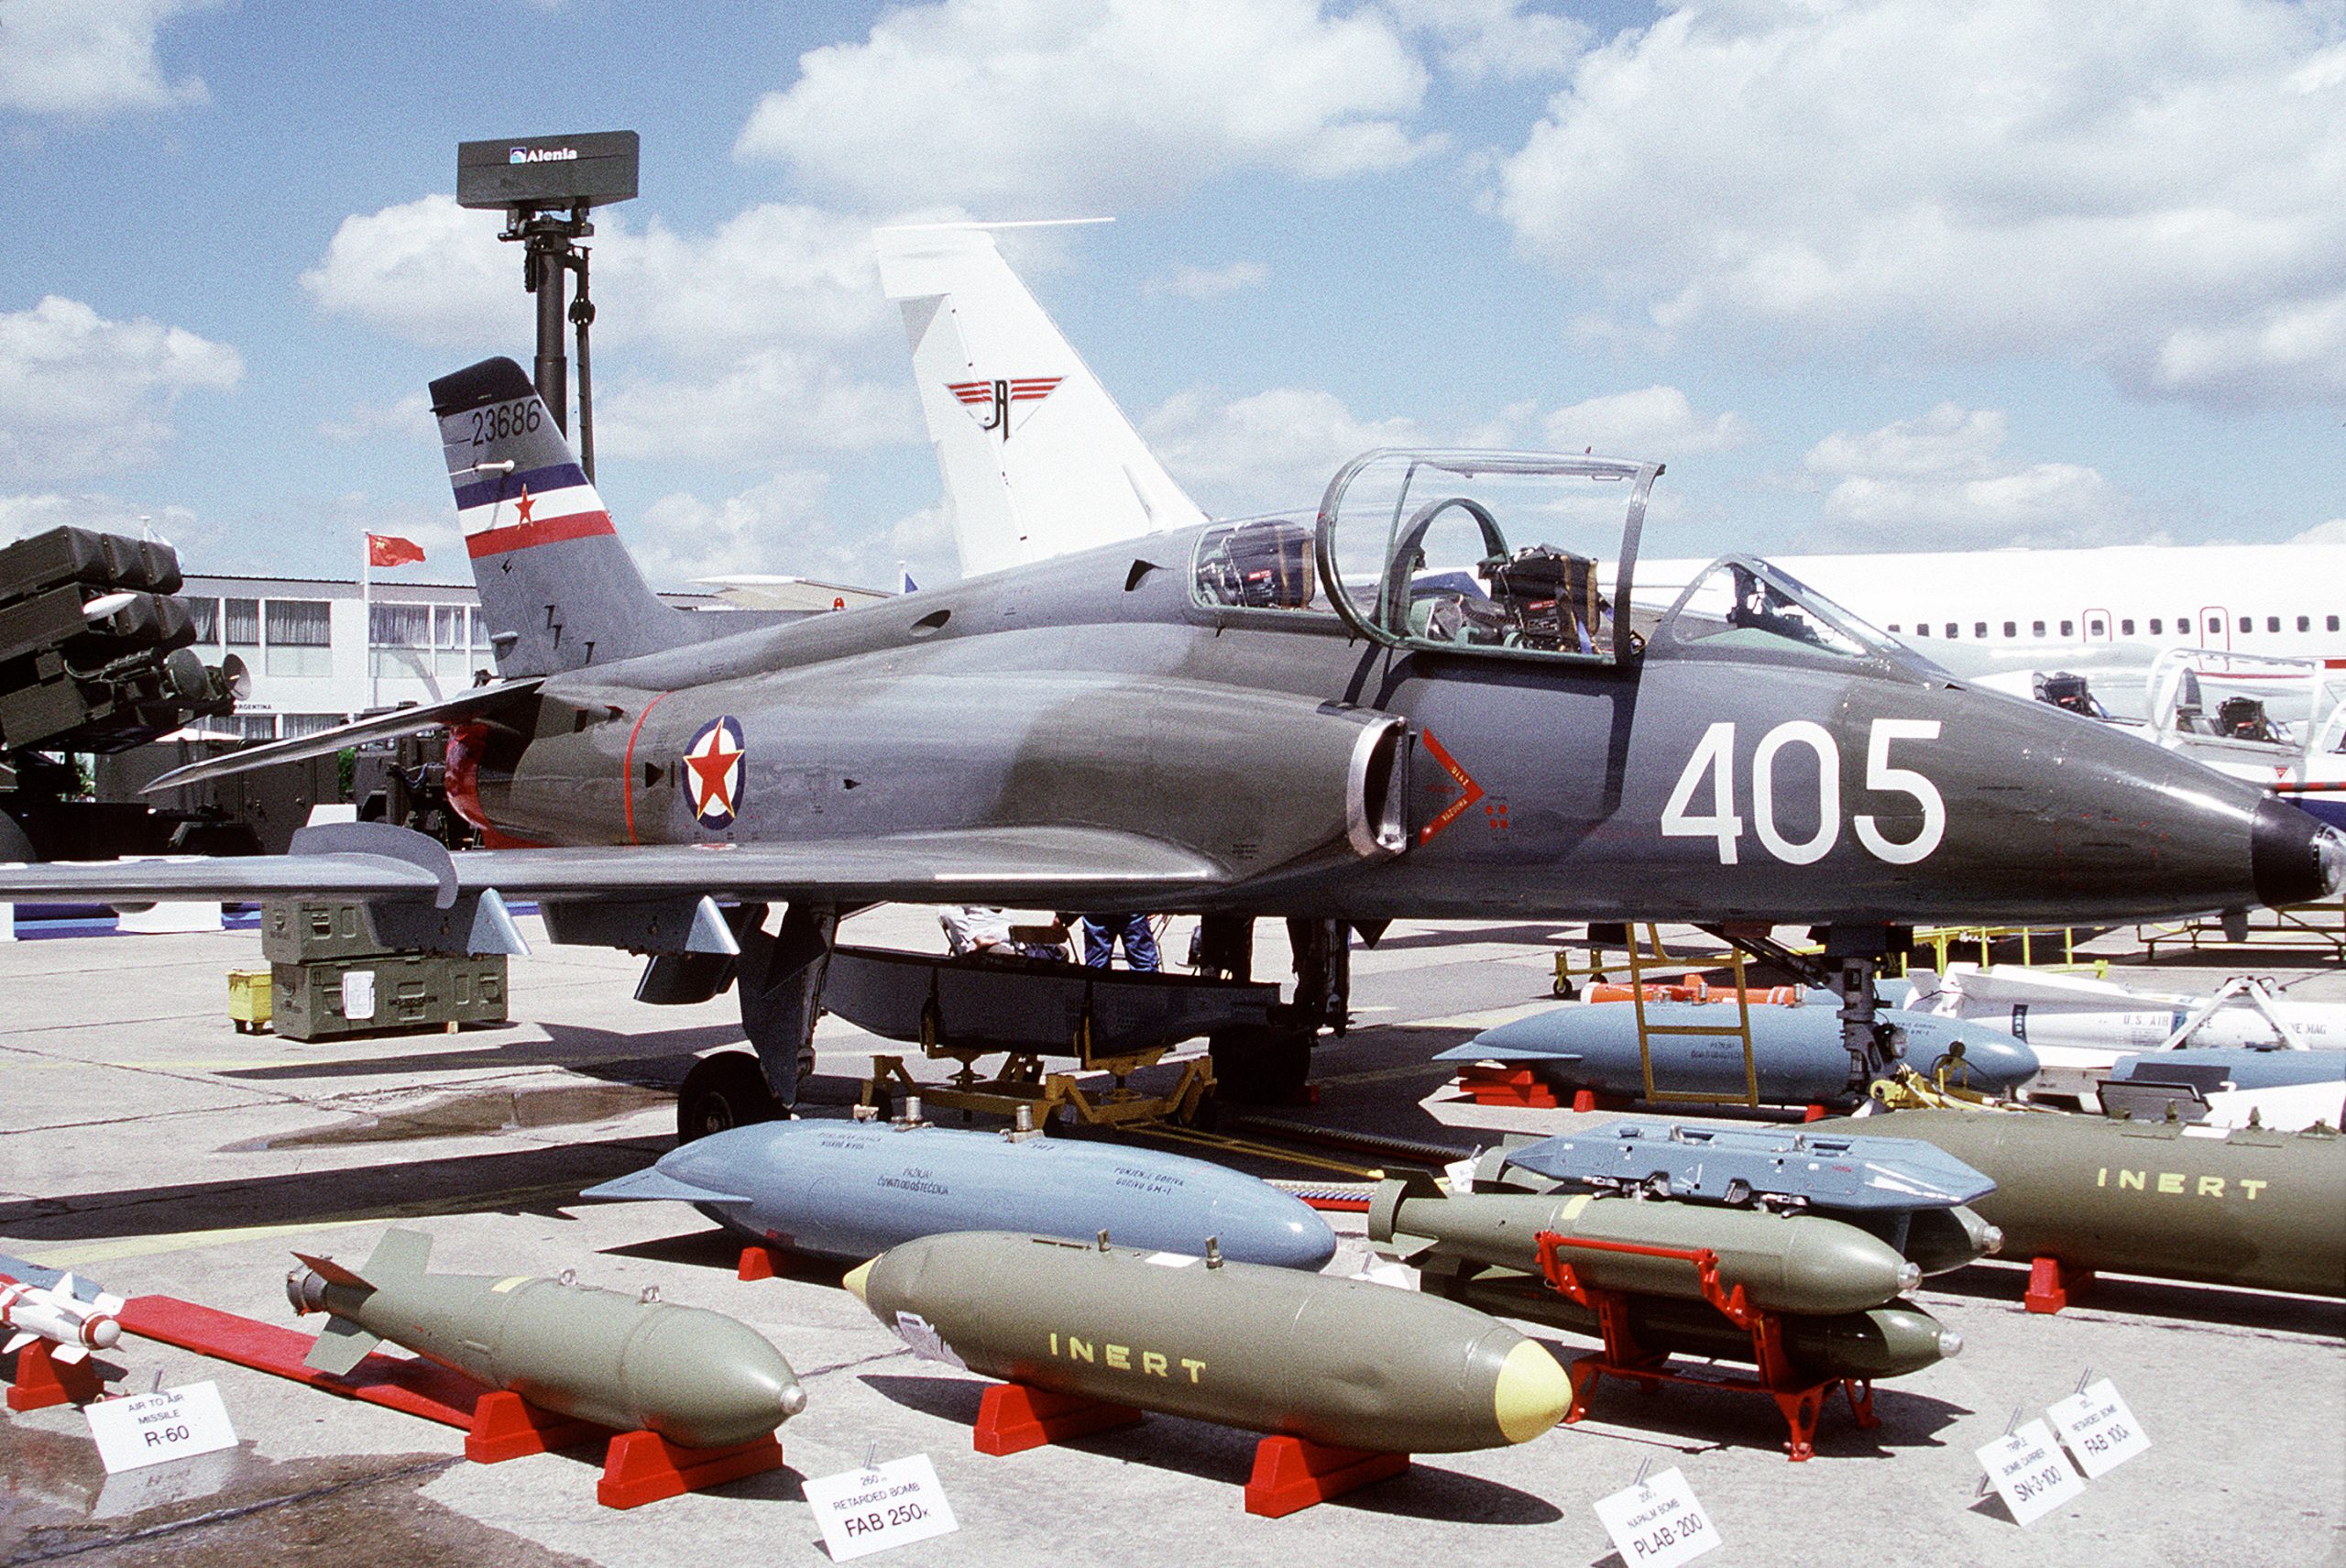 SFR Yugoslav Air Force G-4 Super Galeb light attack and training aircraft showcased at the 1991 Paris Air Show in France